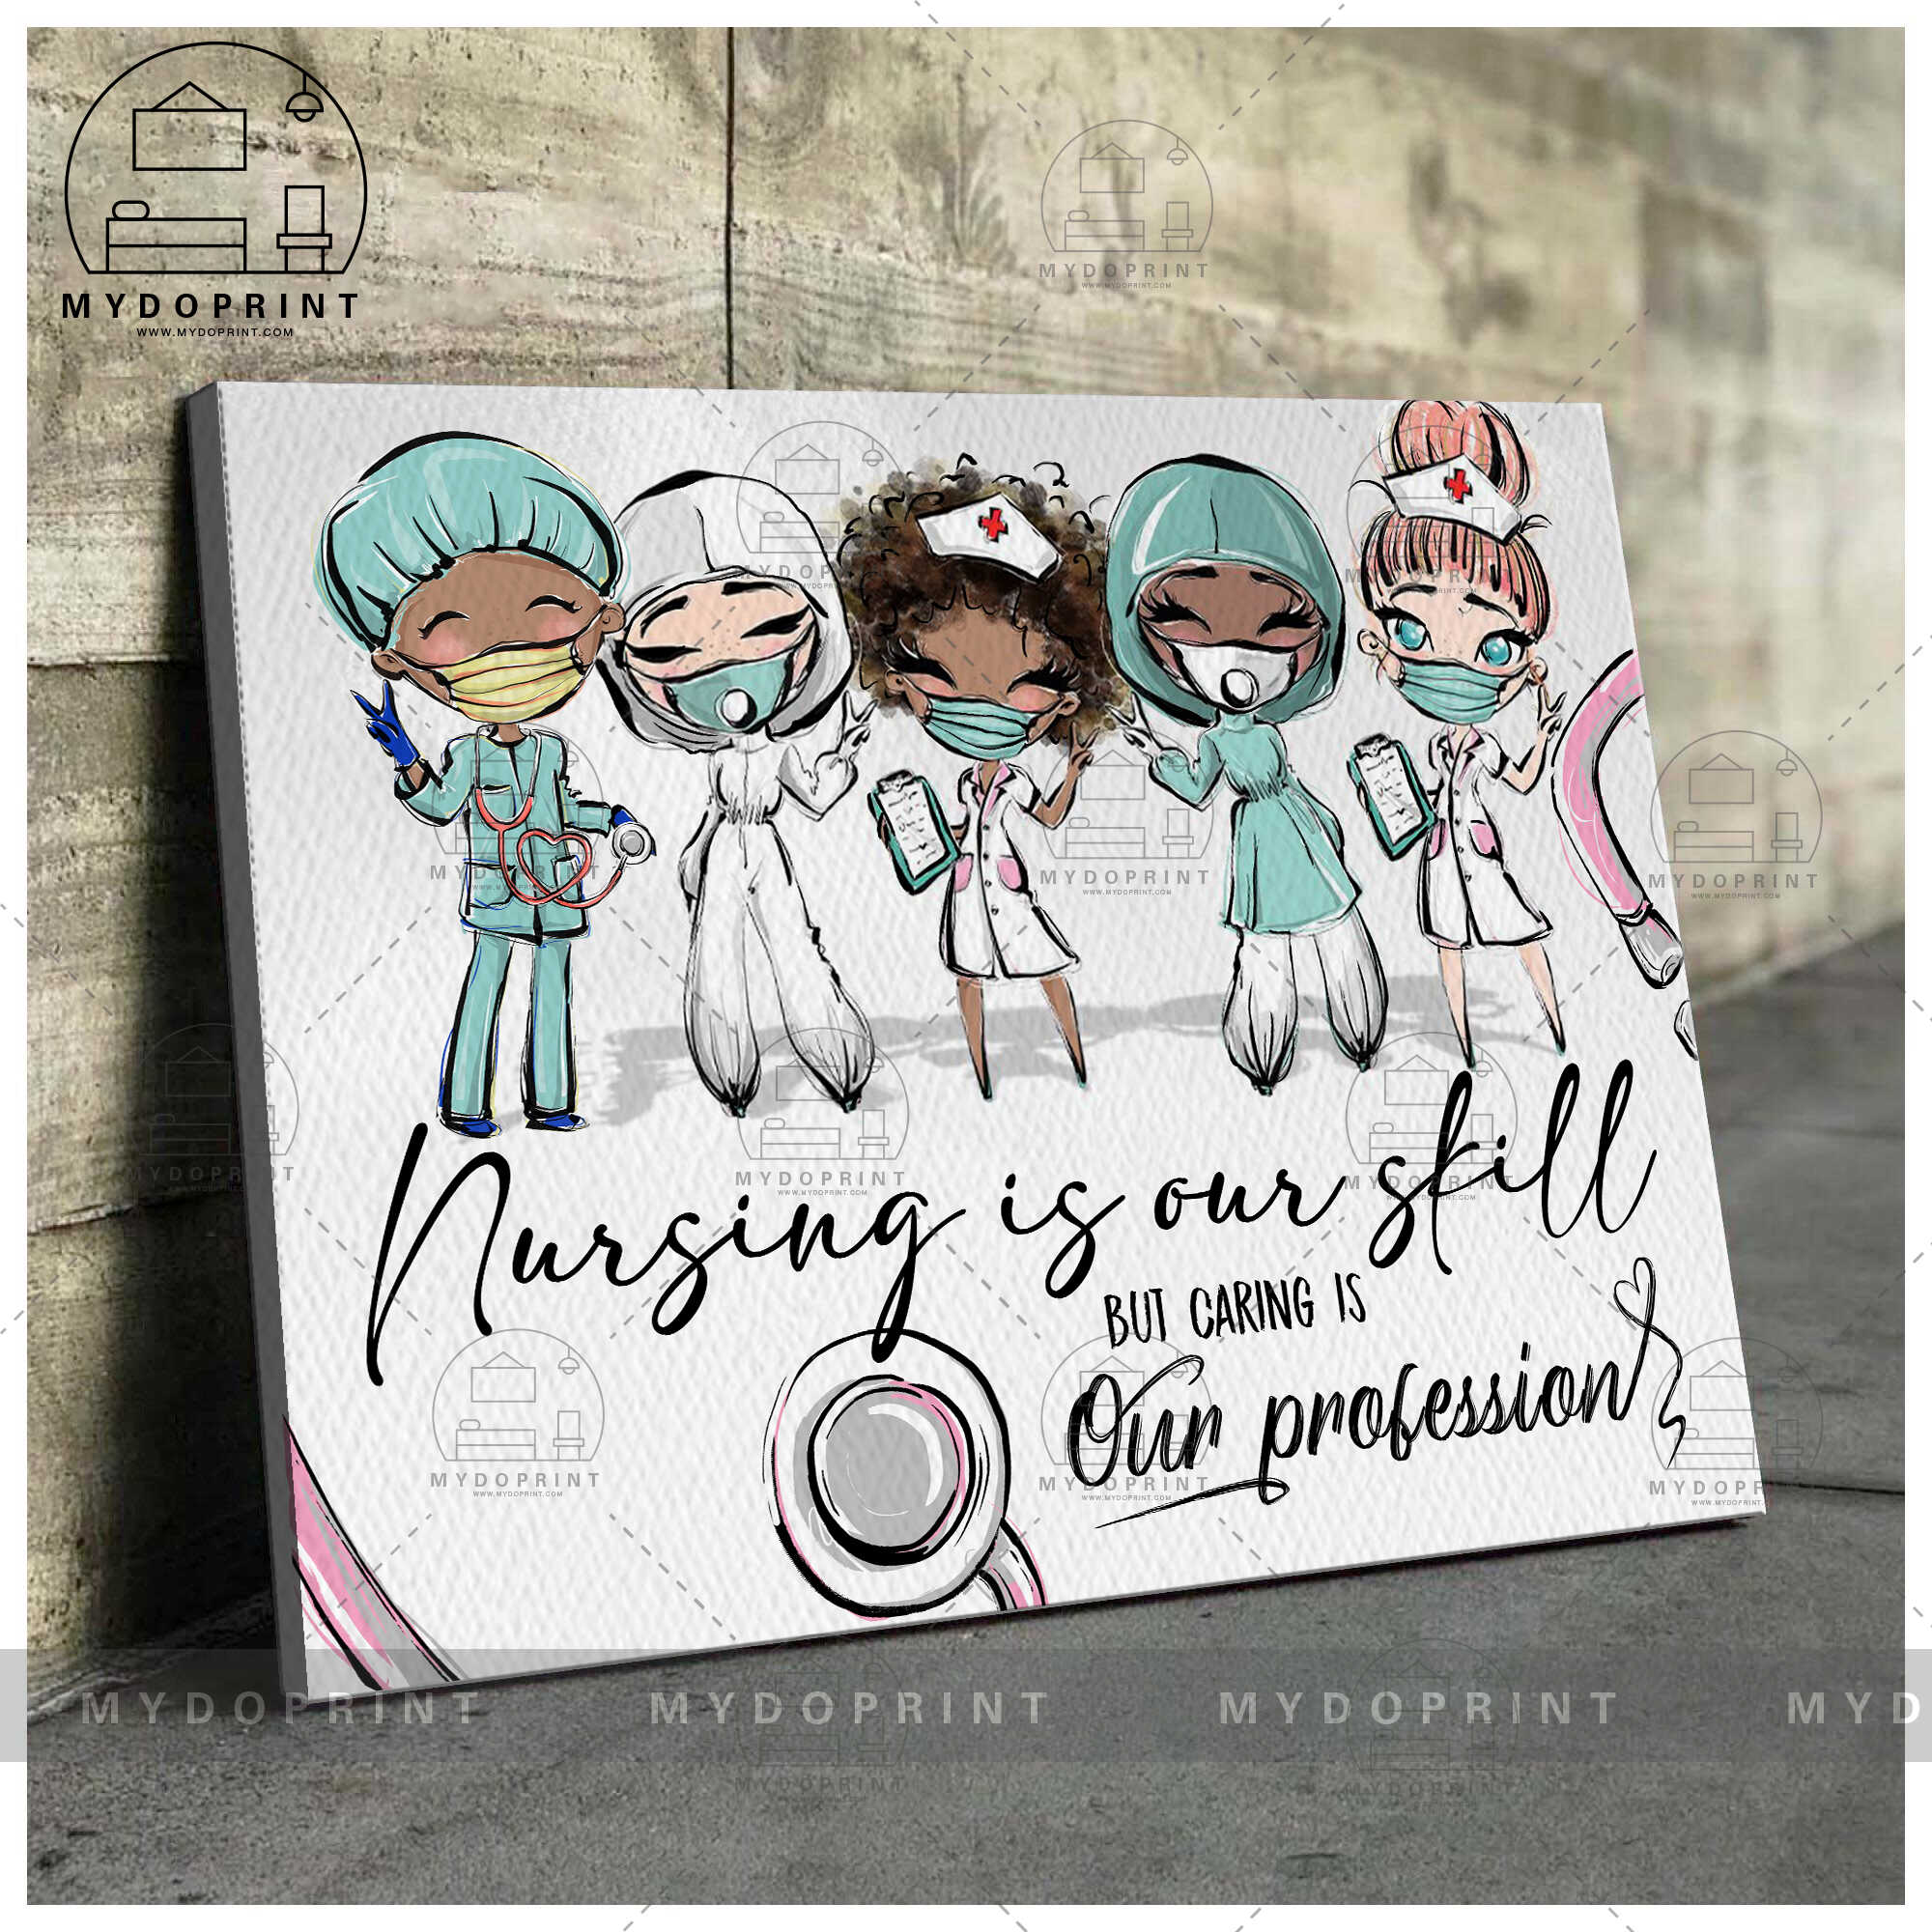 Nursing Is Our Skill, But CARING Is Our Profession Nurse Canvas